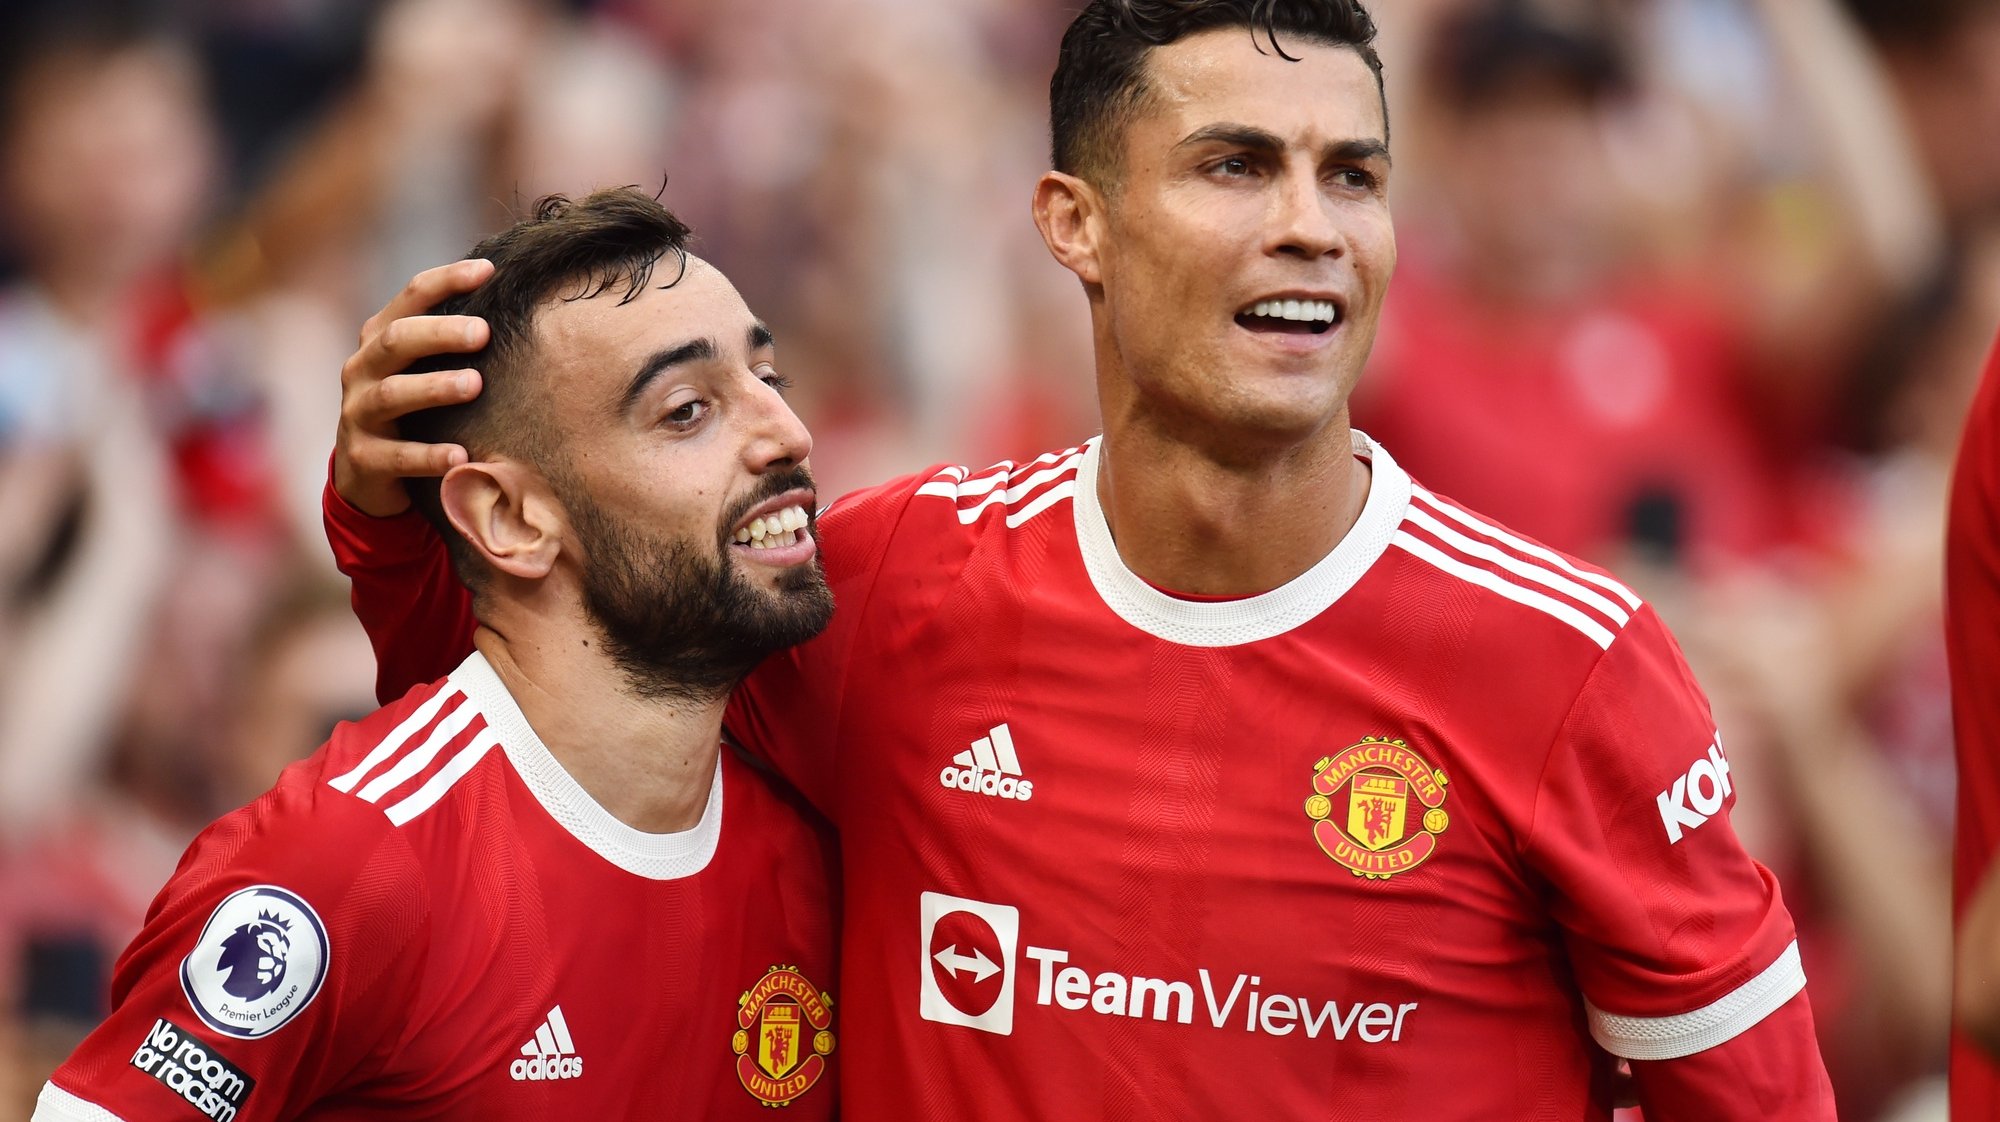 epa09461703 Bruno Fernandes of Manchester United (L) is being congratulated by teammate Cristiano Ronaldo after scoring his team&#039;s third goal during the English Premier League soccer match between Manchester United and Newcastle United in Manchester, Britain, 11 September 2021.  EPA/PETER POWELL EDITORIAL USE ONLY. No use with unauthorized audio, video, data, fixture lists, club/league logos or &#039;live&#039; services. Online in-match use limited to 120 images, no video emulation. No use in betting, games or single club/league/player publications